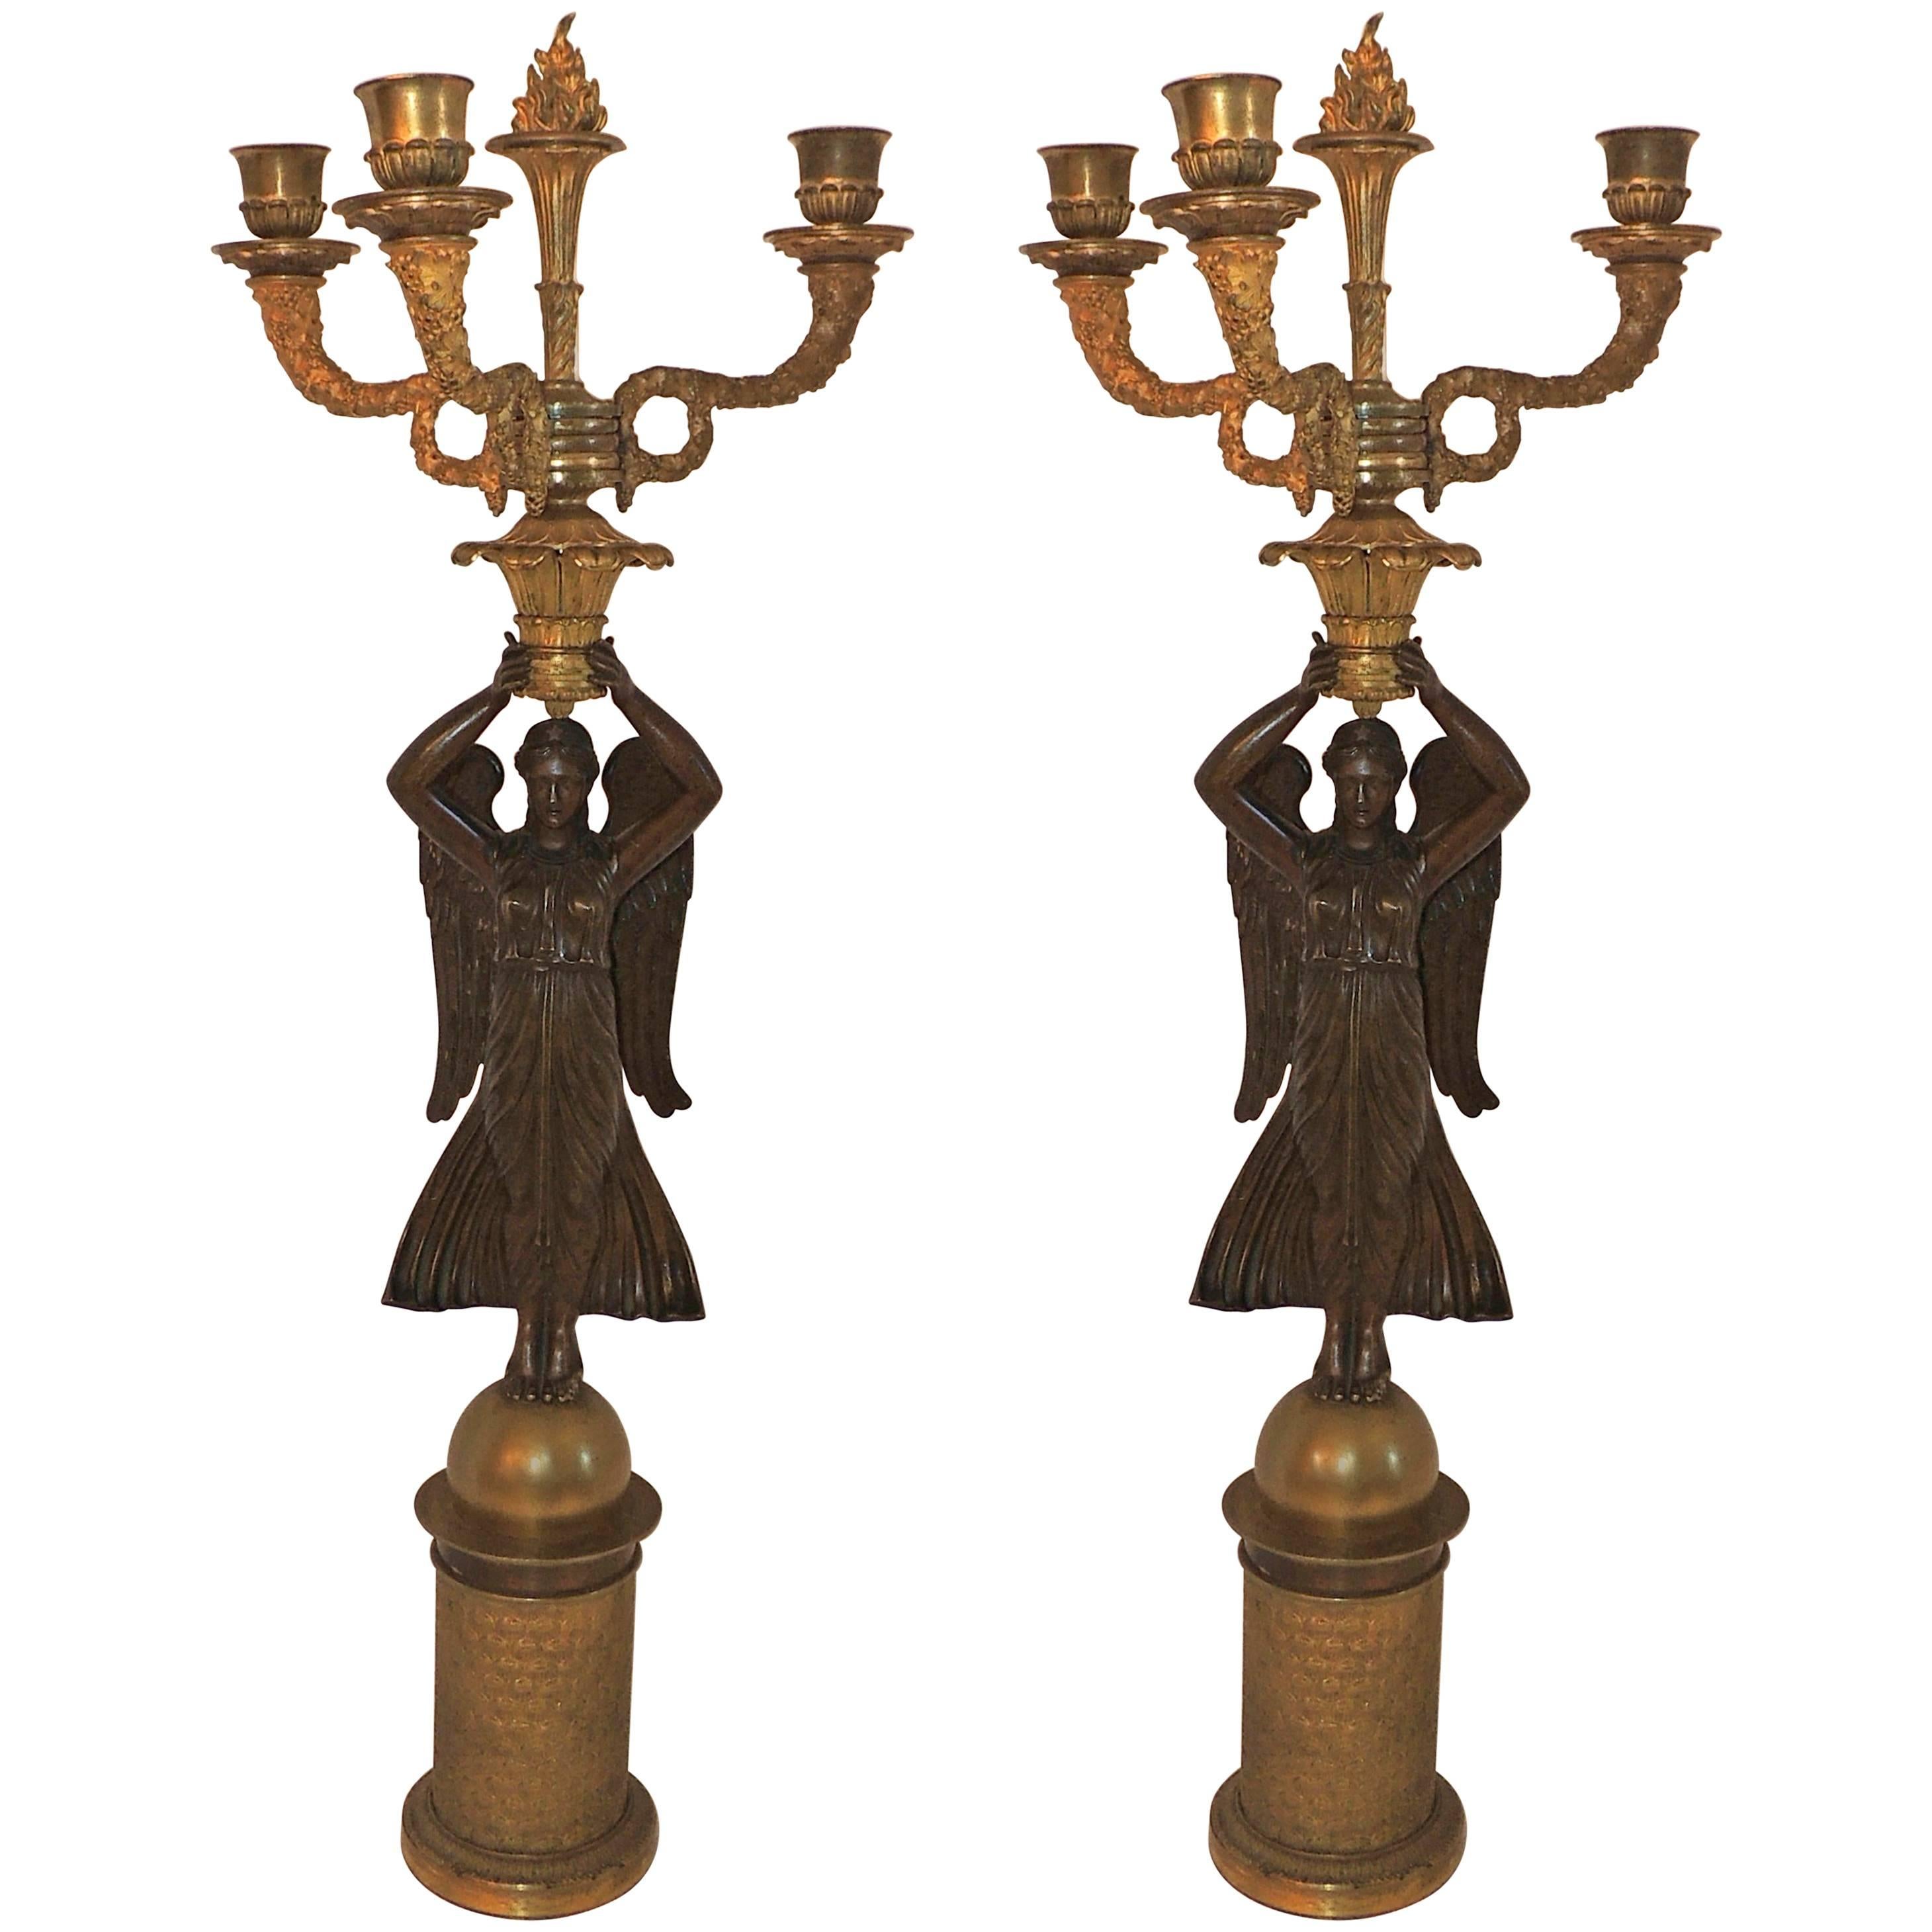 Wonderful Pair of French Empire Dore Bronze Ormolu-Mounted Figural Candelabras